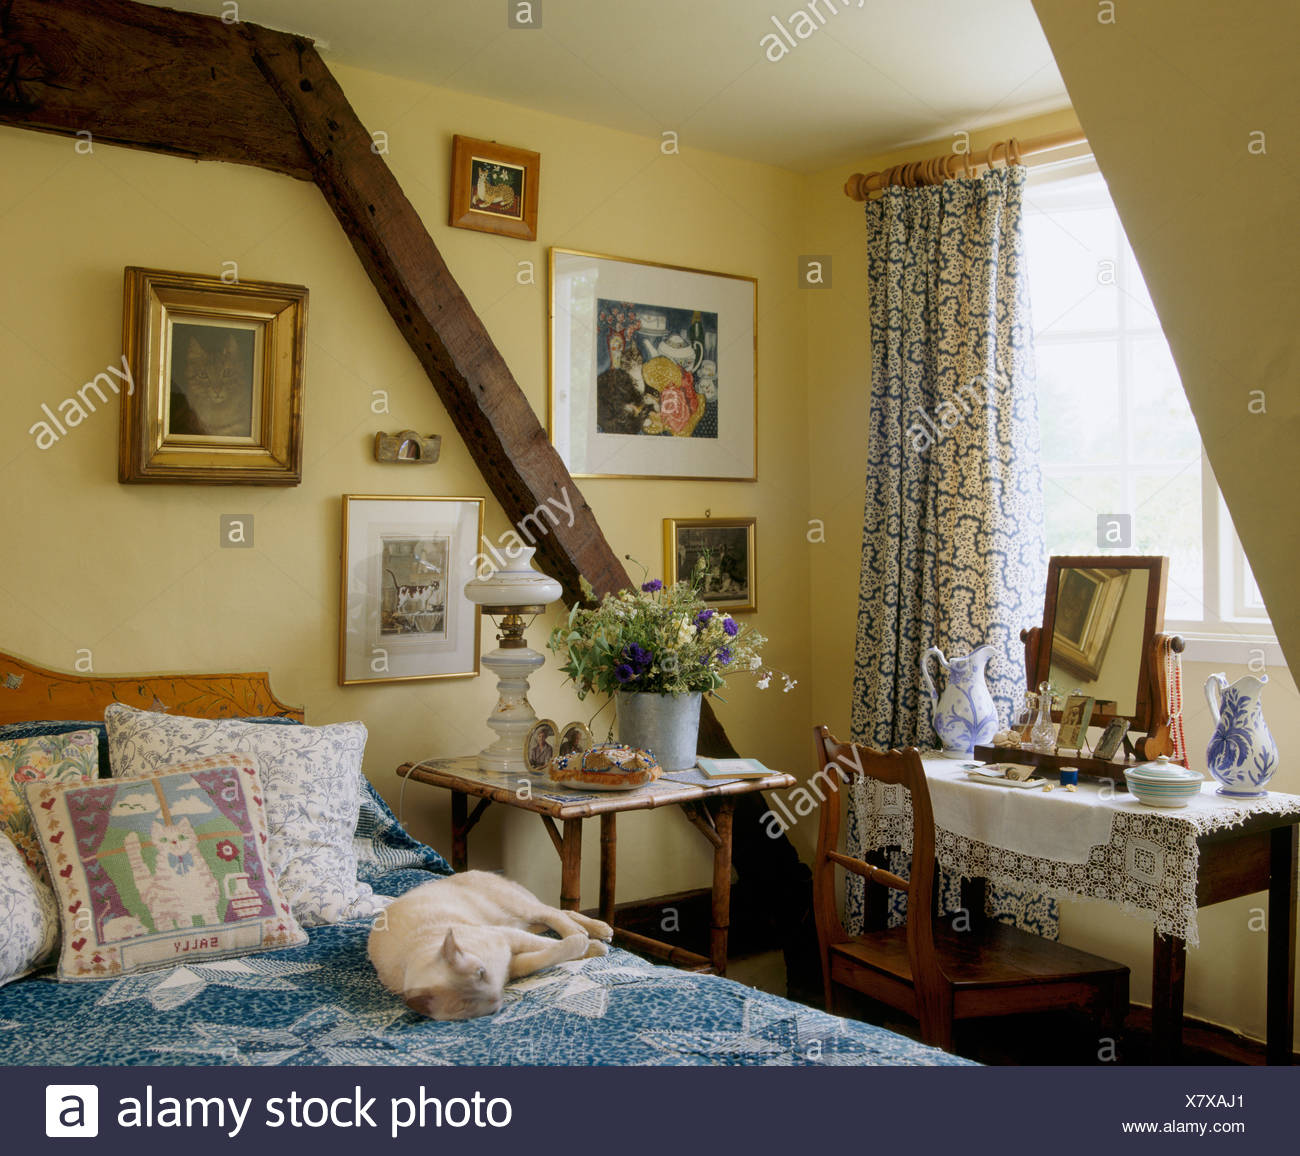 Dog Sleeping On Bed With Cushions And Blue Cover In Cottage